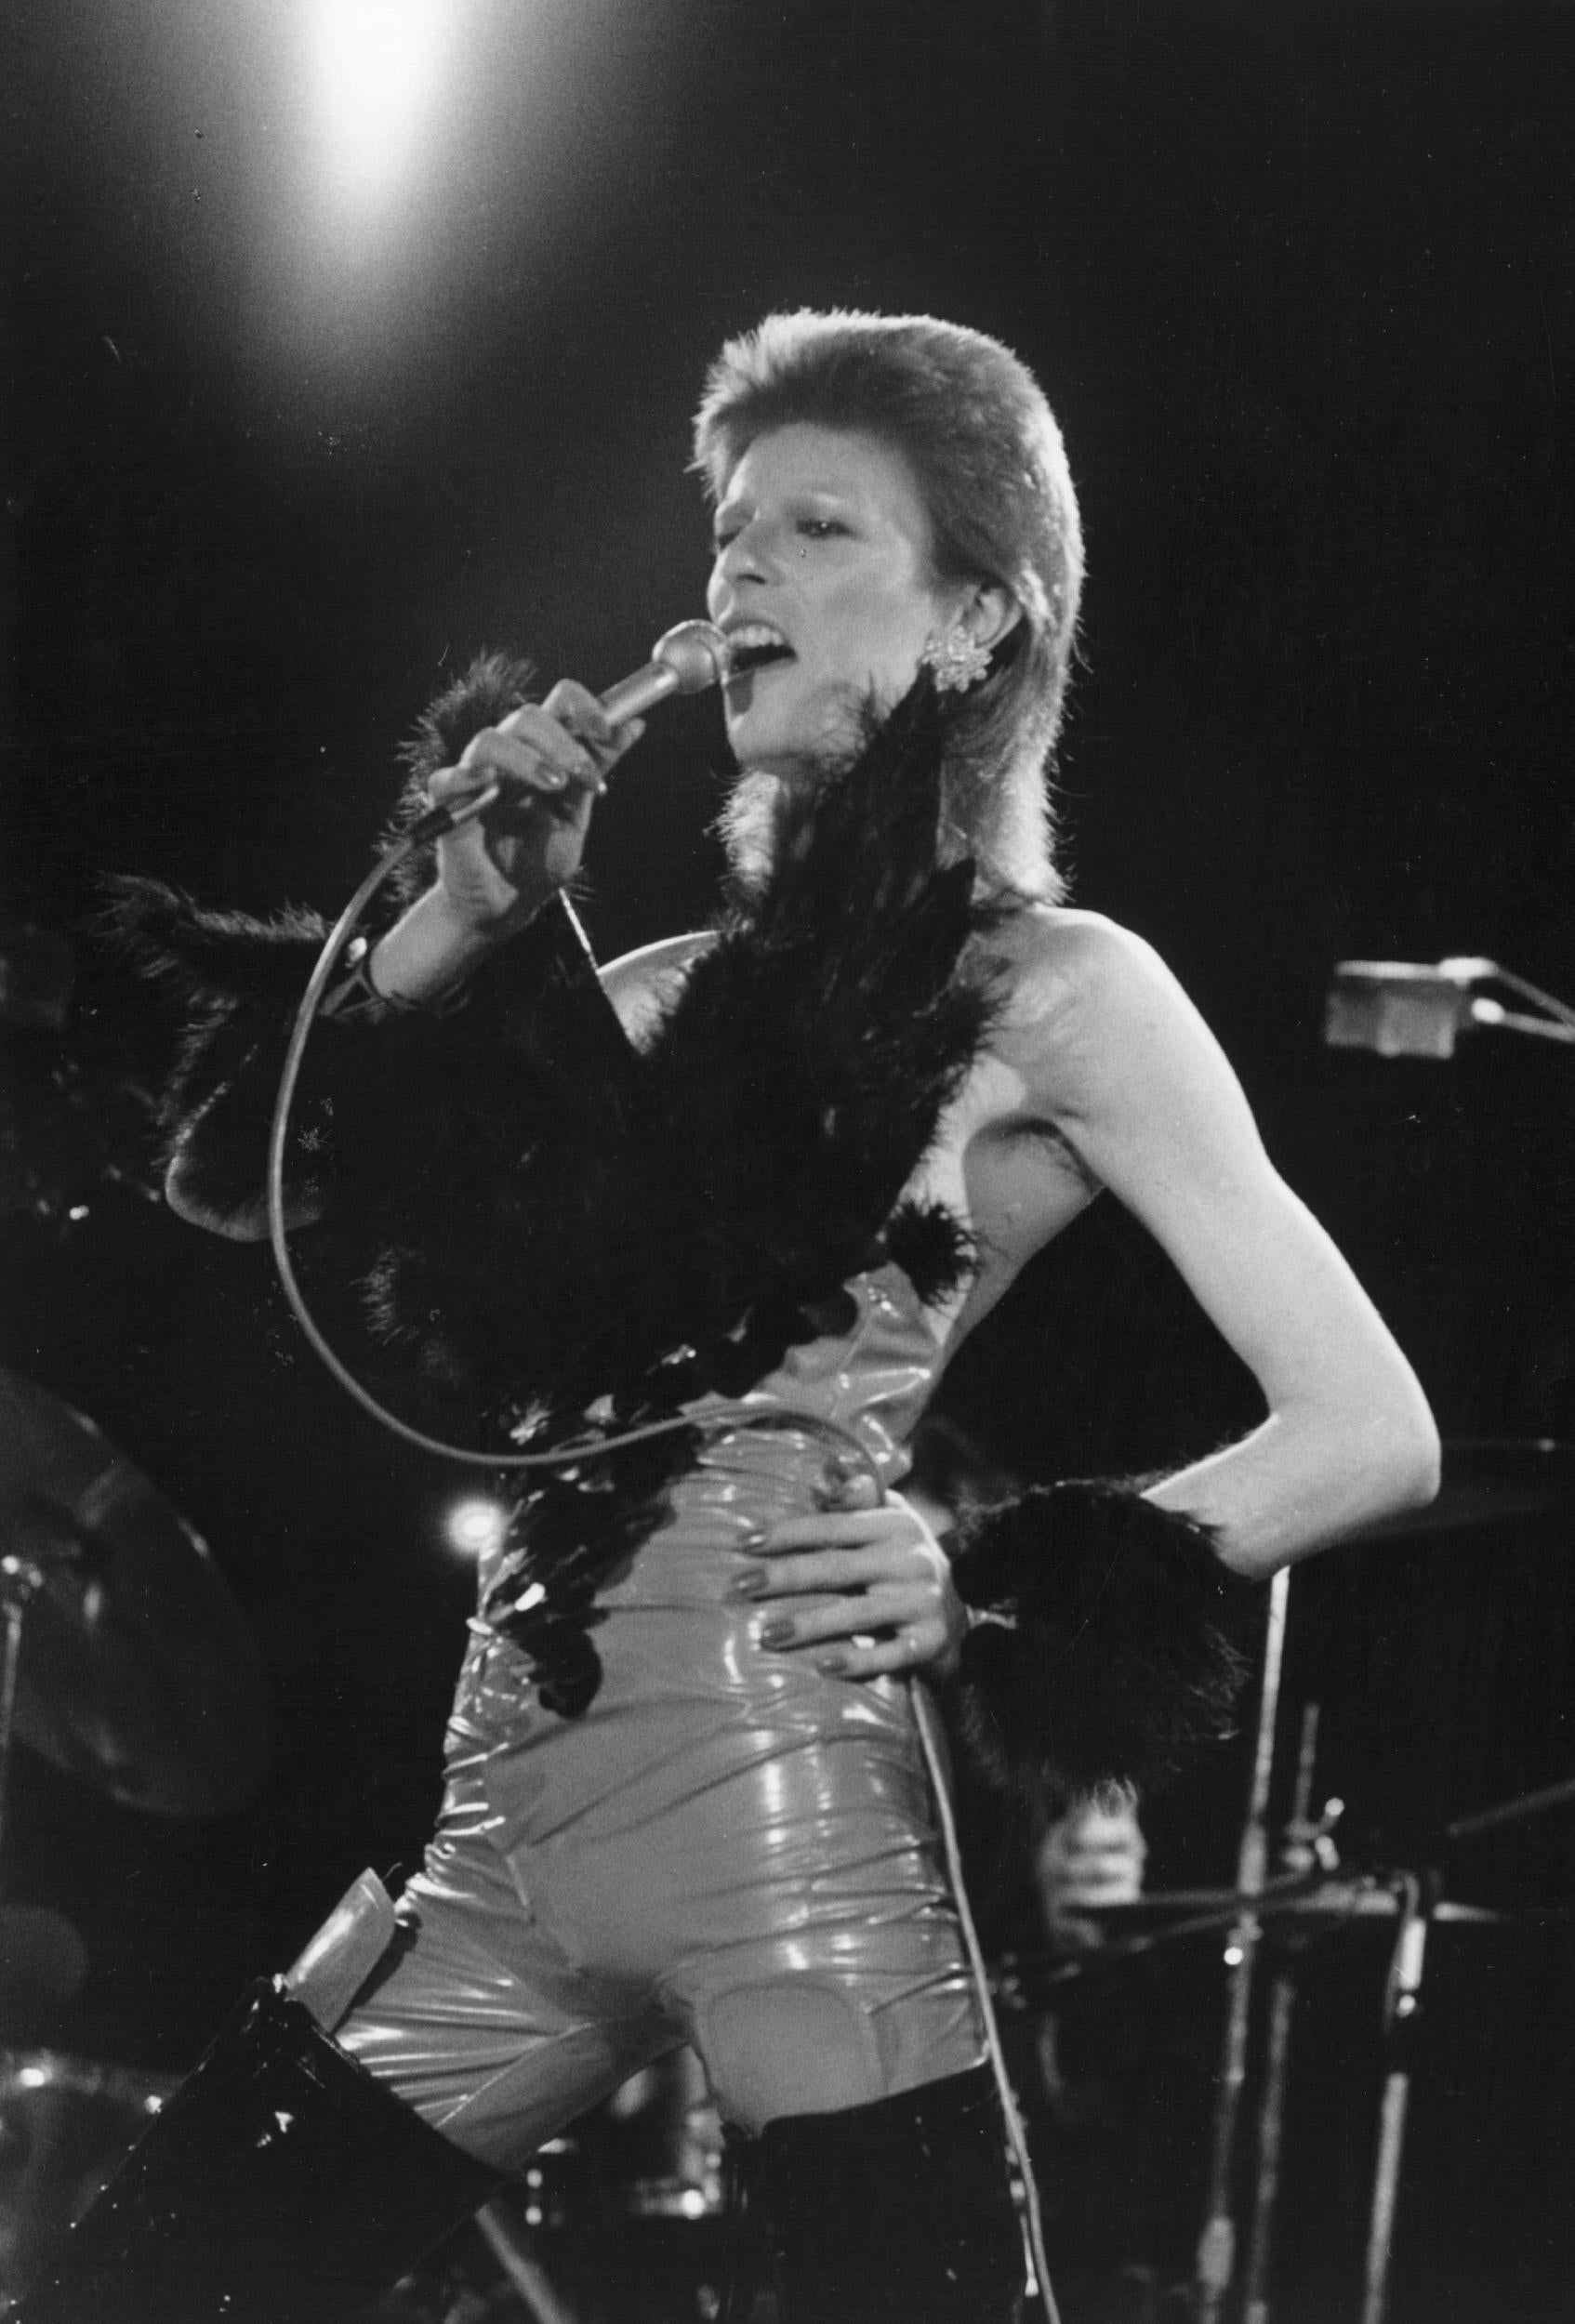 David Bowie performing in his 'Angel of Death' costume at The Marquee Club in London